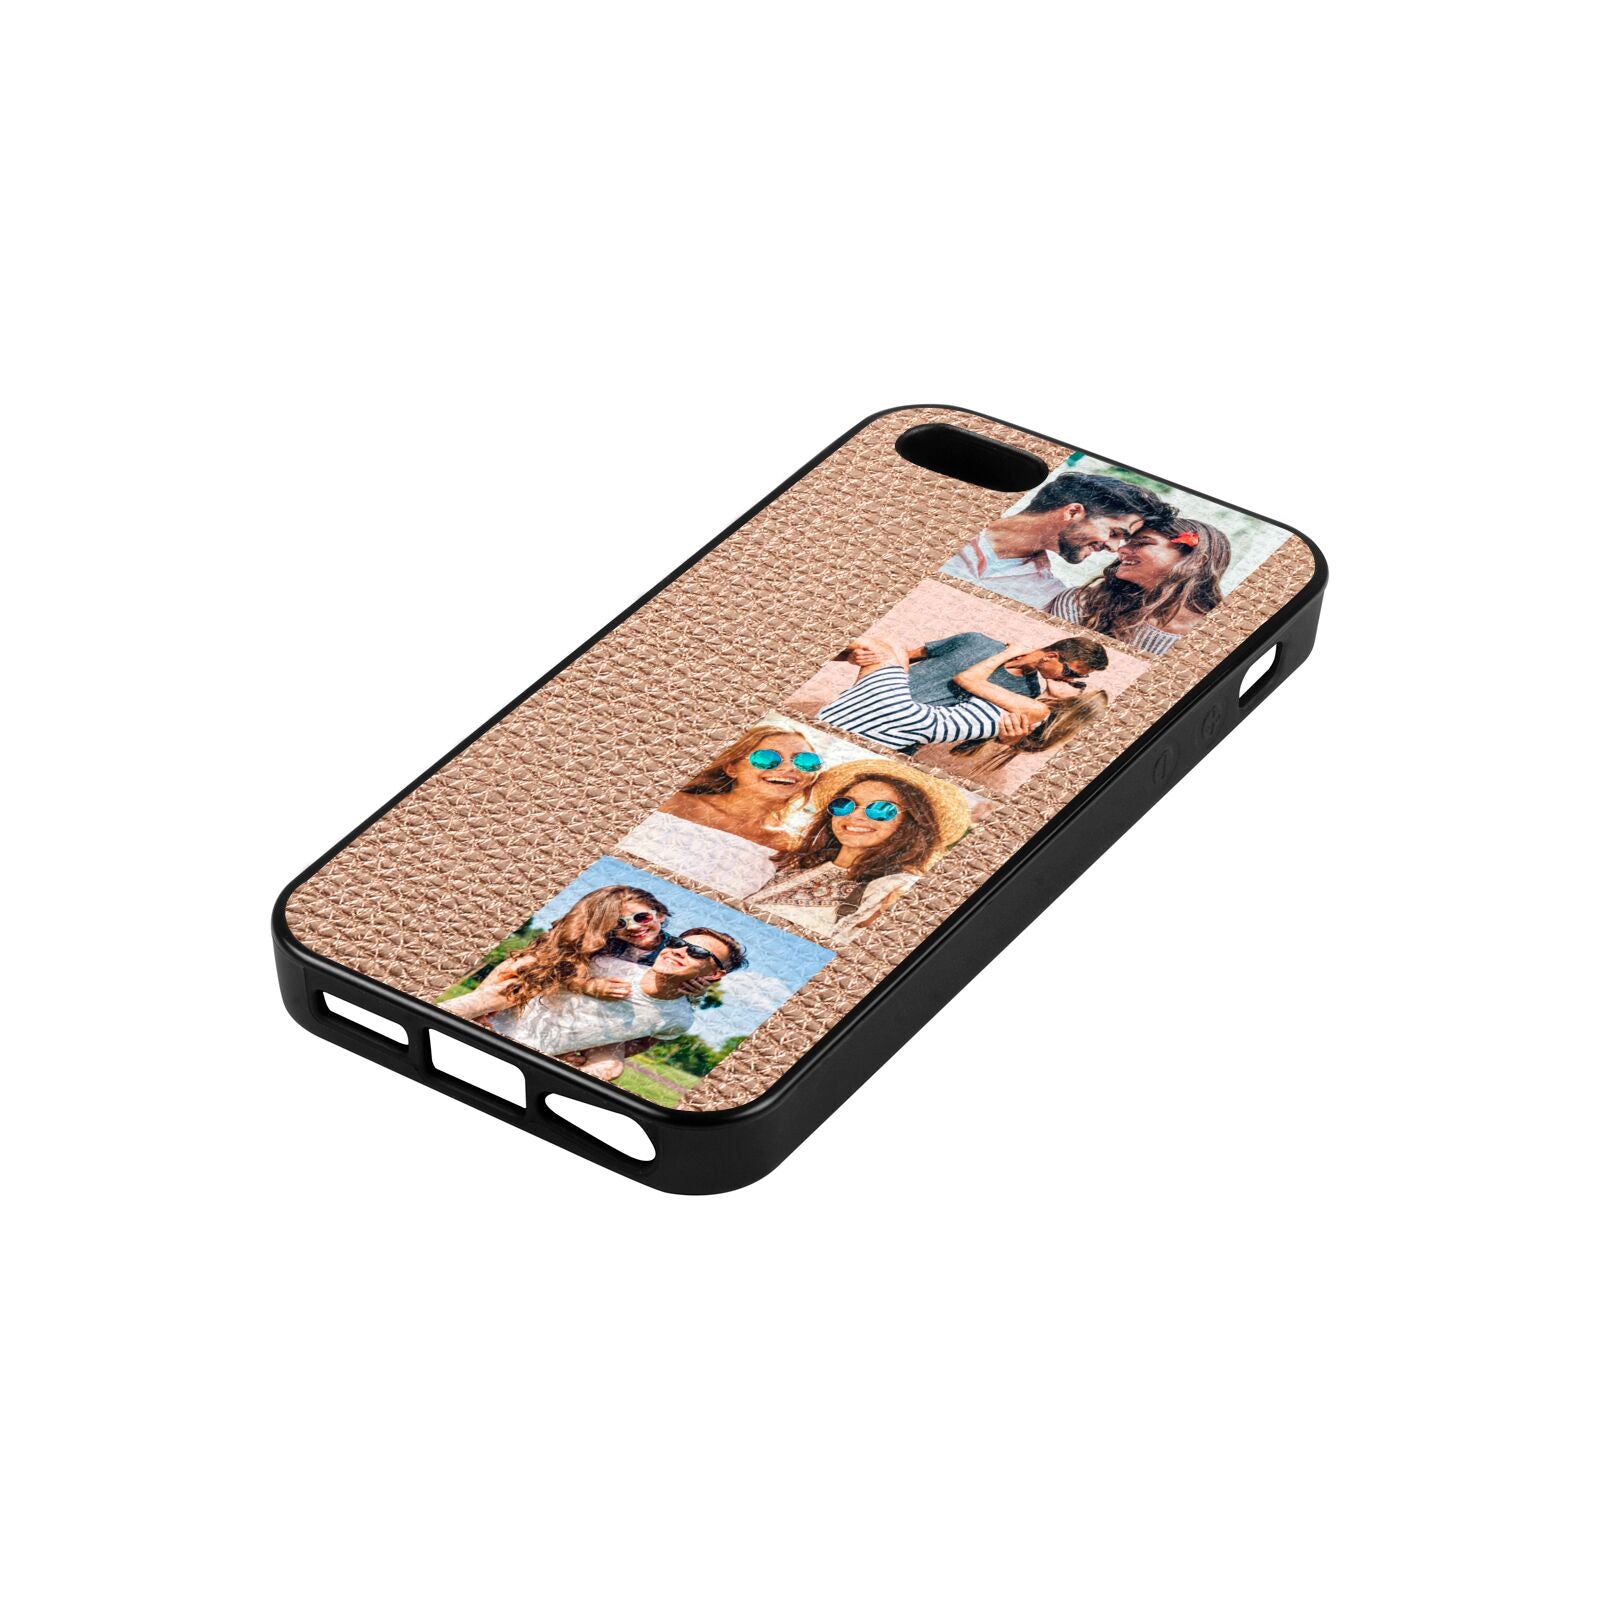 Photo Strip Montage Upload Rose Gold Pebble Leather iPhone 5 Case Side Angle